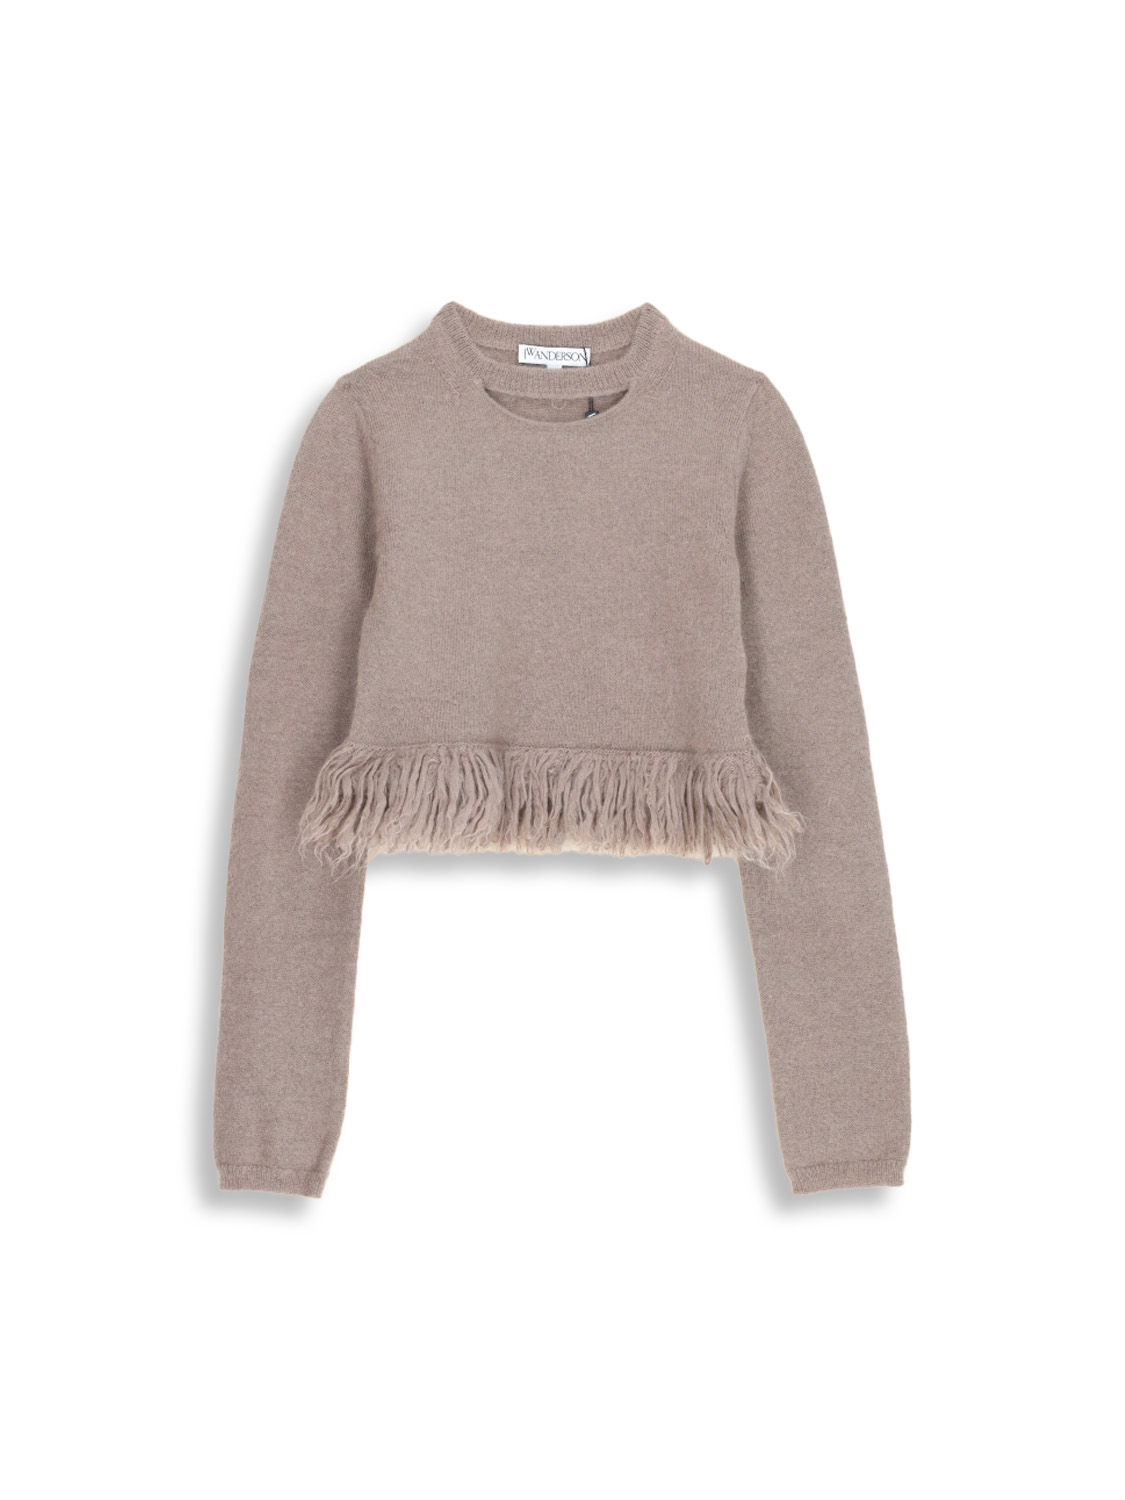 Loop Hem - Knitted sweater with fringed hem in mohair